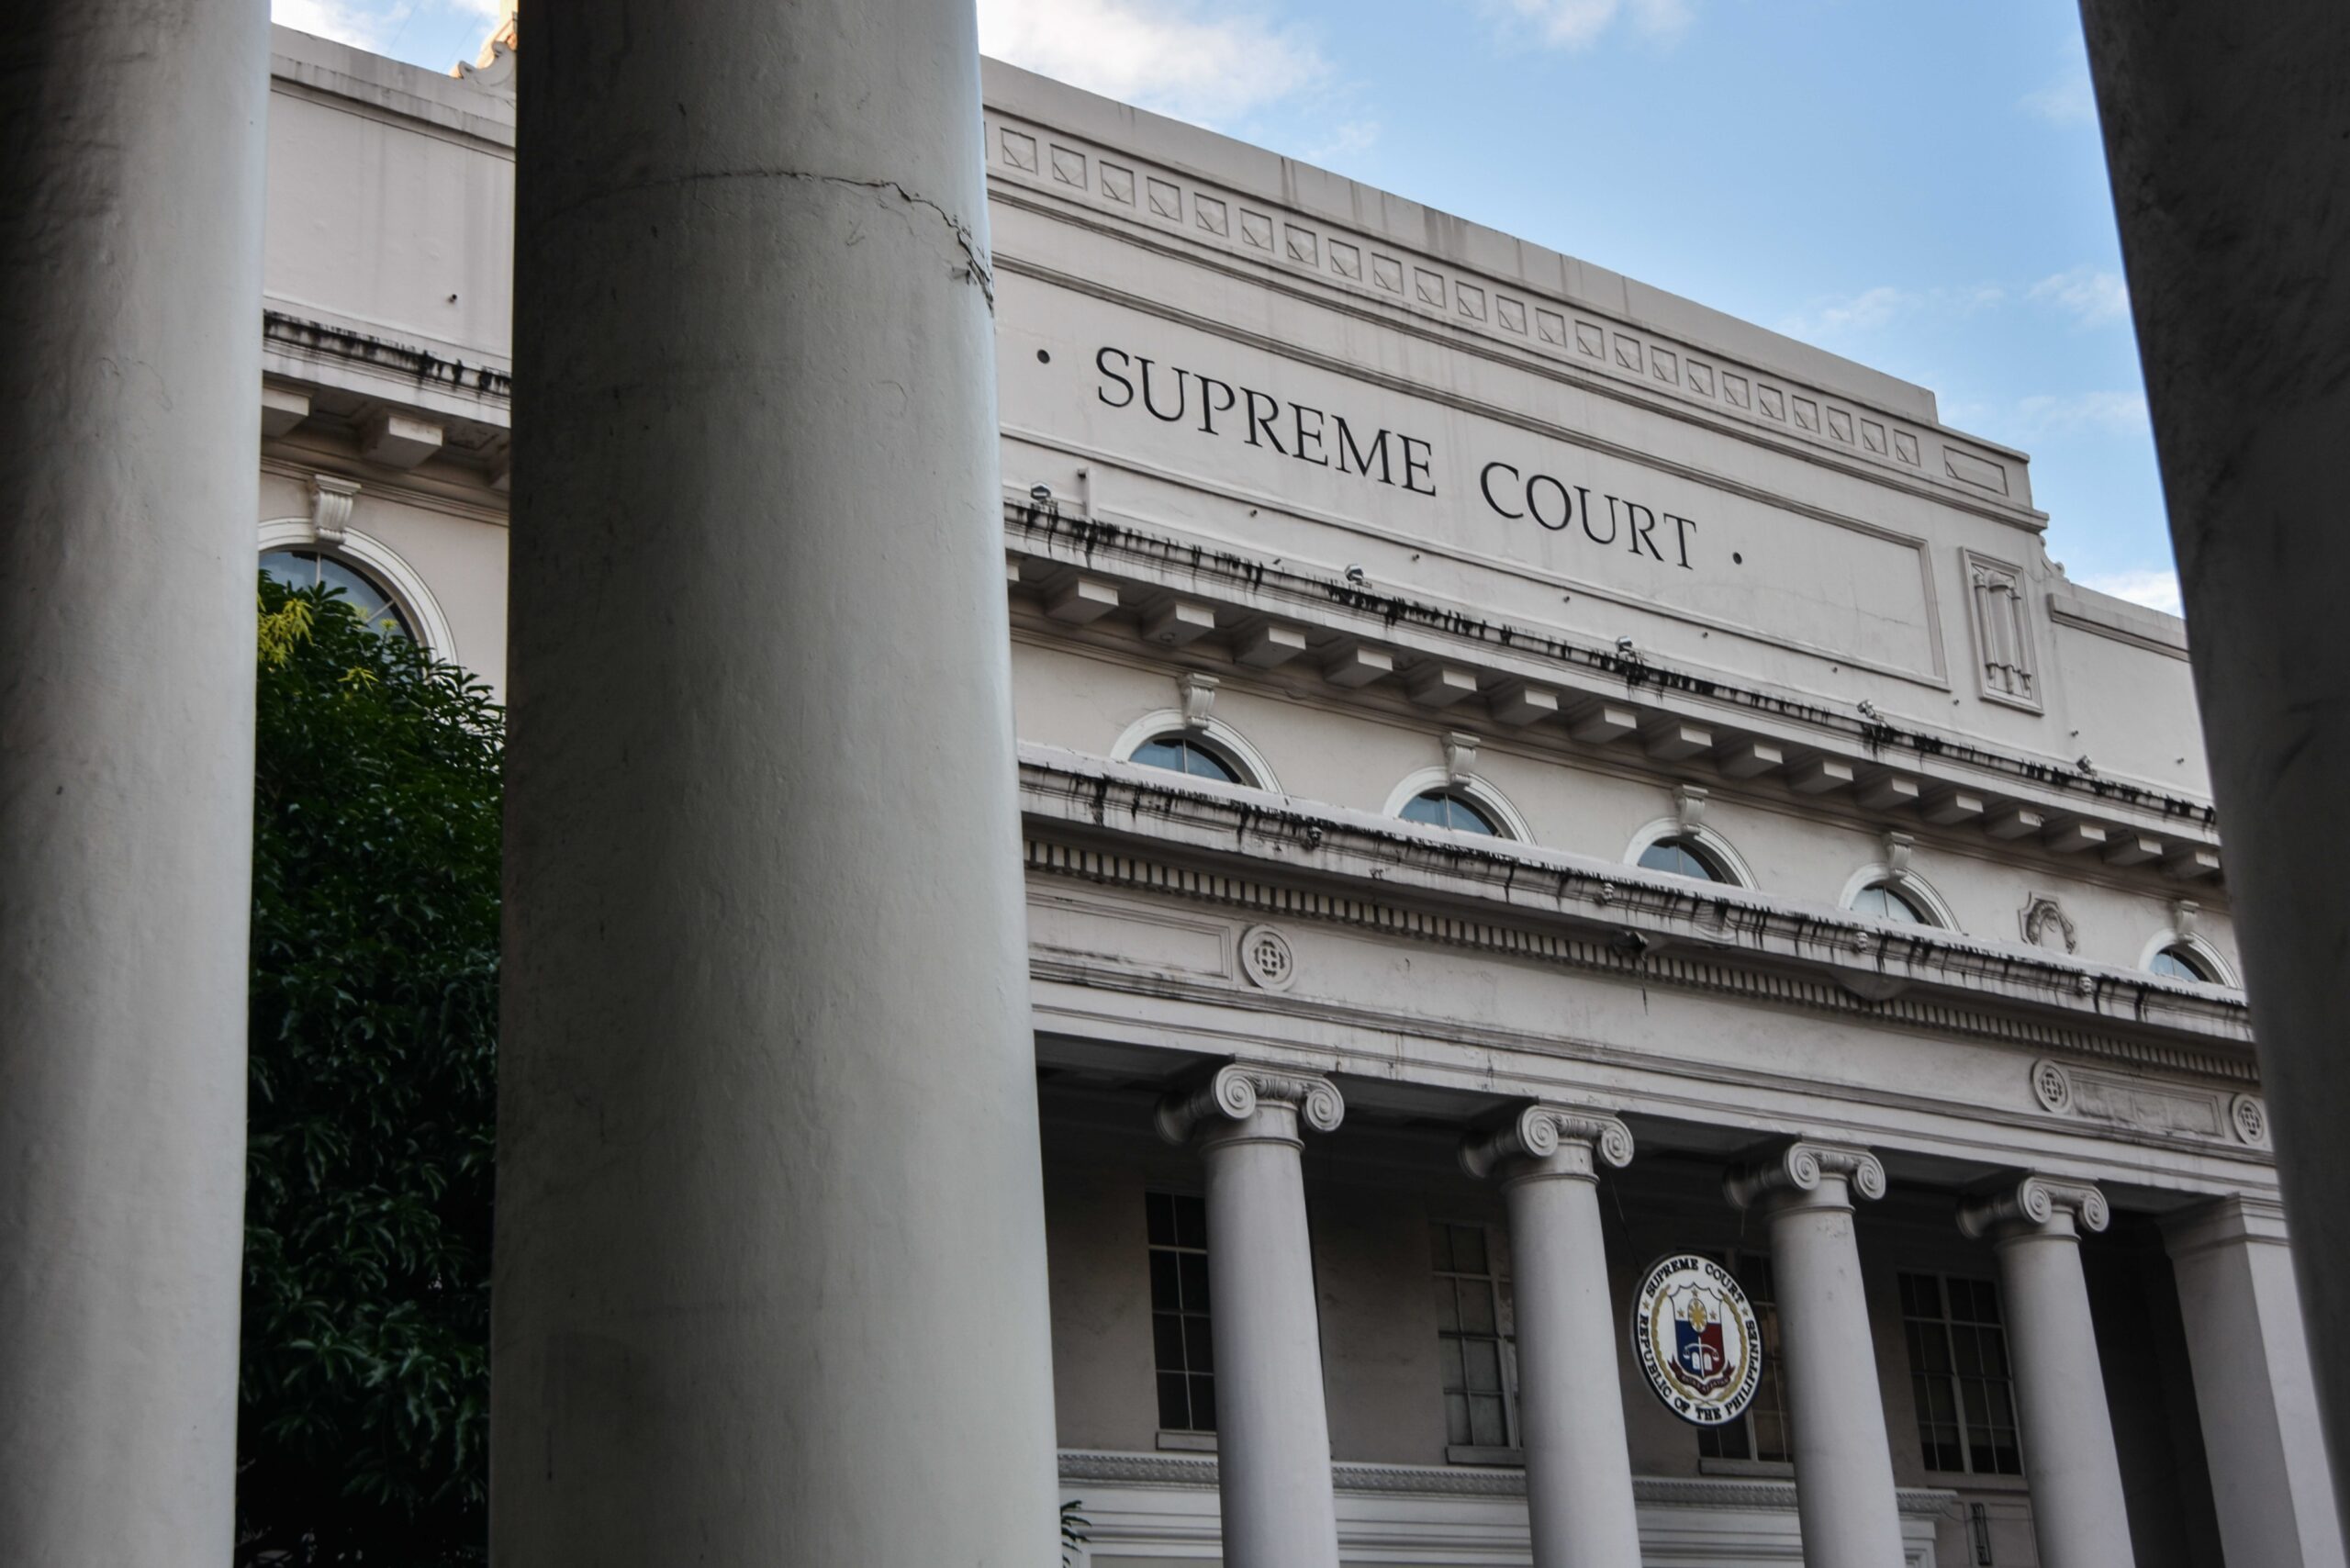 SC affirms ruling that barred candidacy of Lucio Tan’s daughter